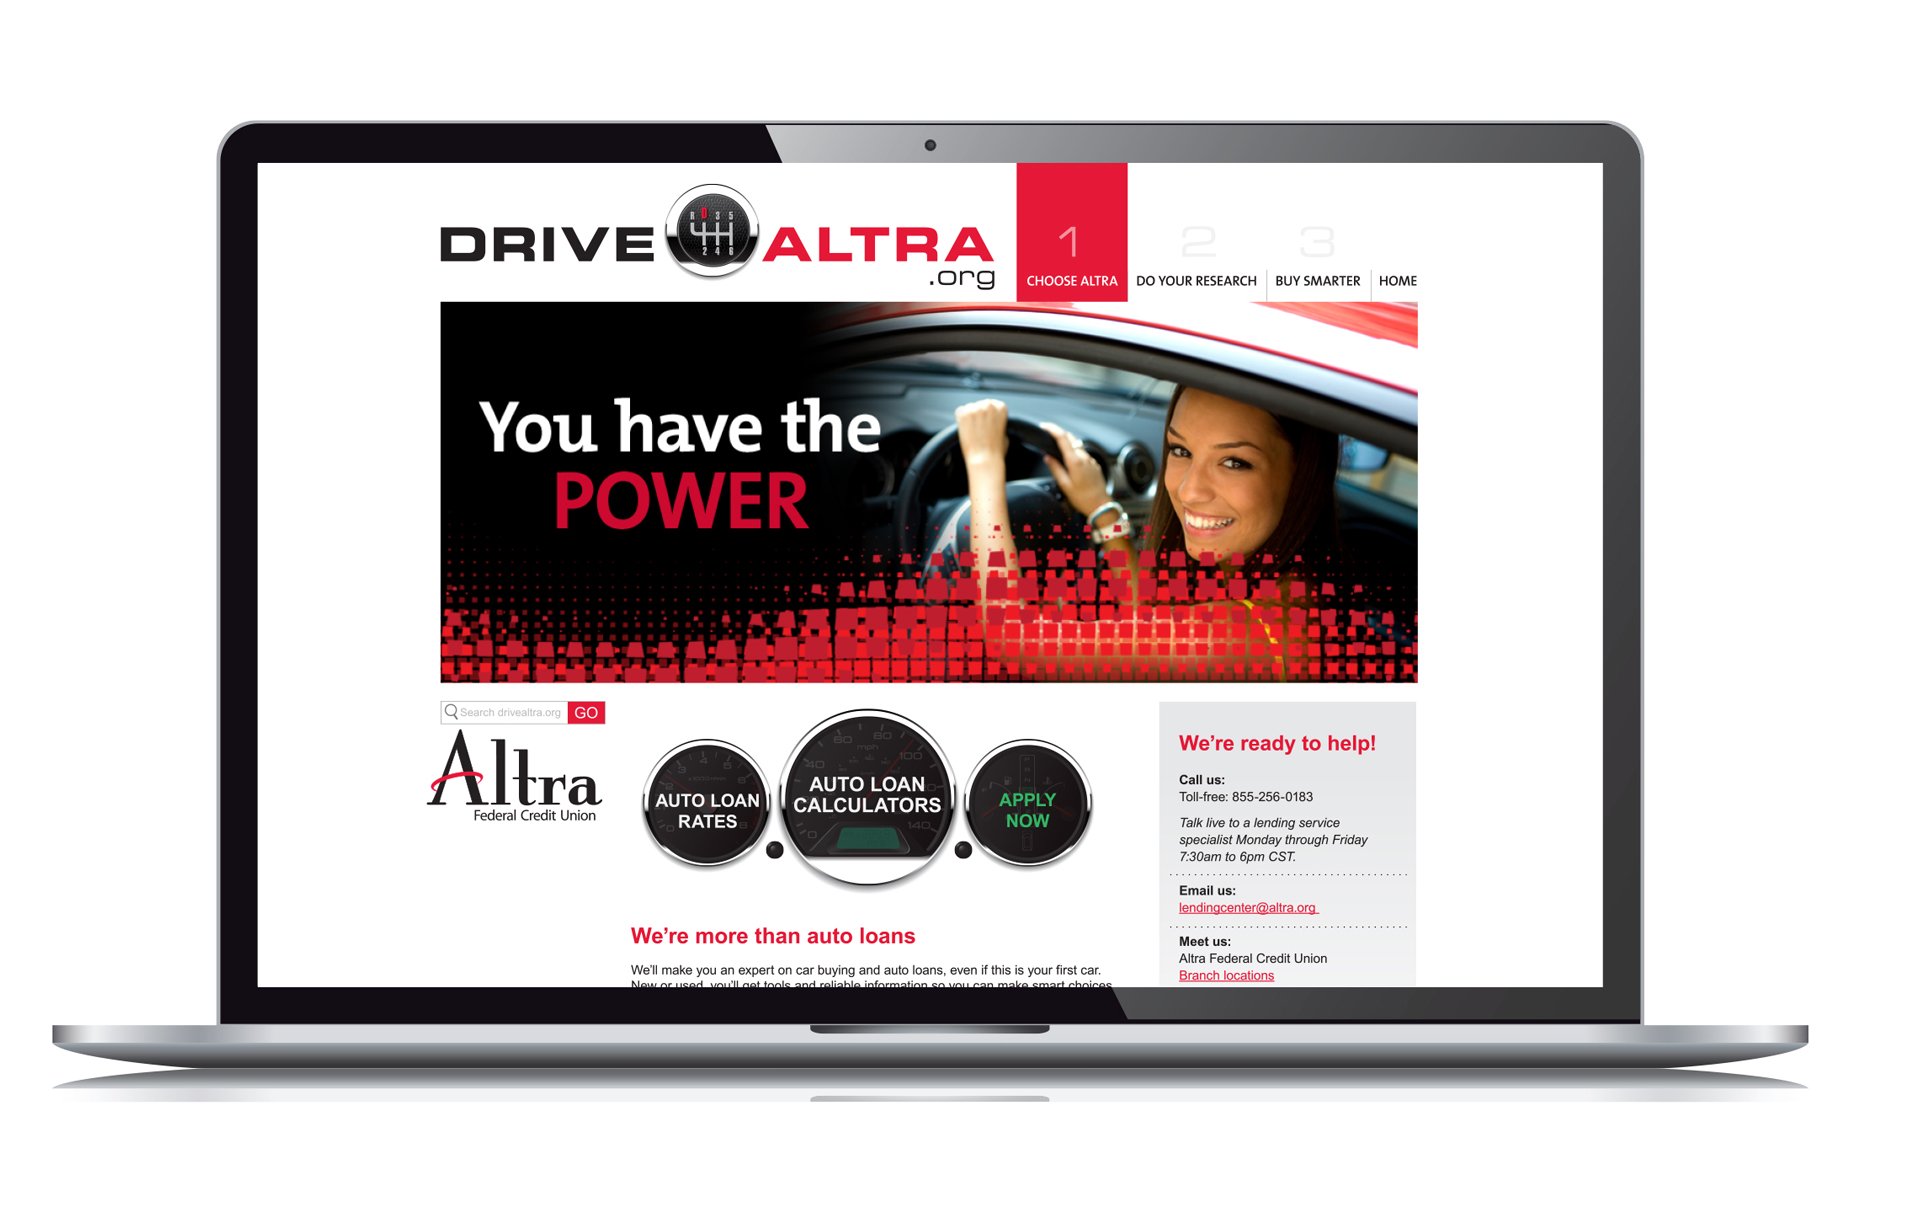 Full-color Drive Altra dot org website home page with you have the power headline created by Vendi and displayed on a laptop